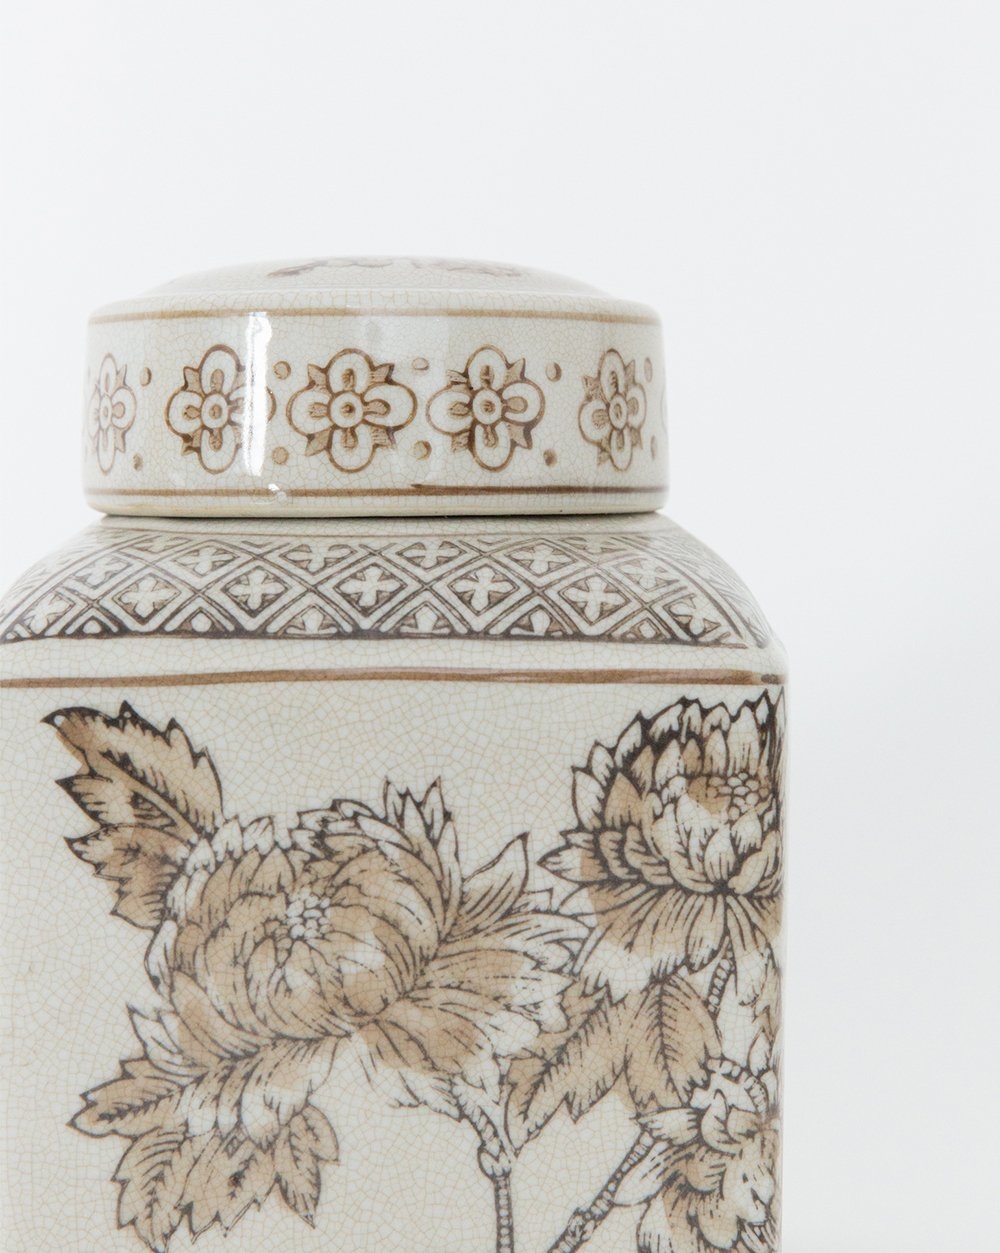 TAUPE GINGER JAR - SMALL - Image 3